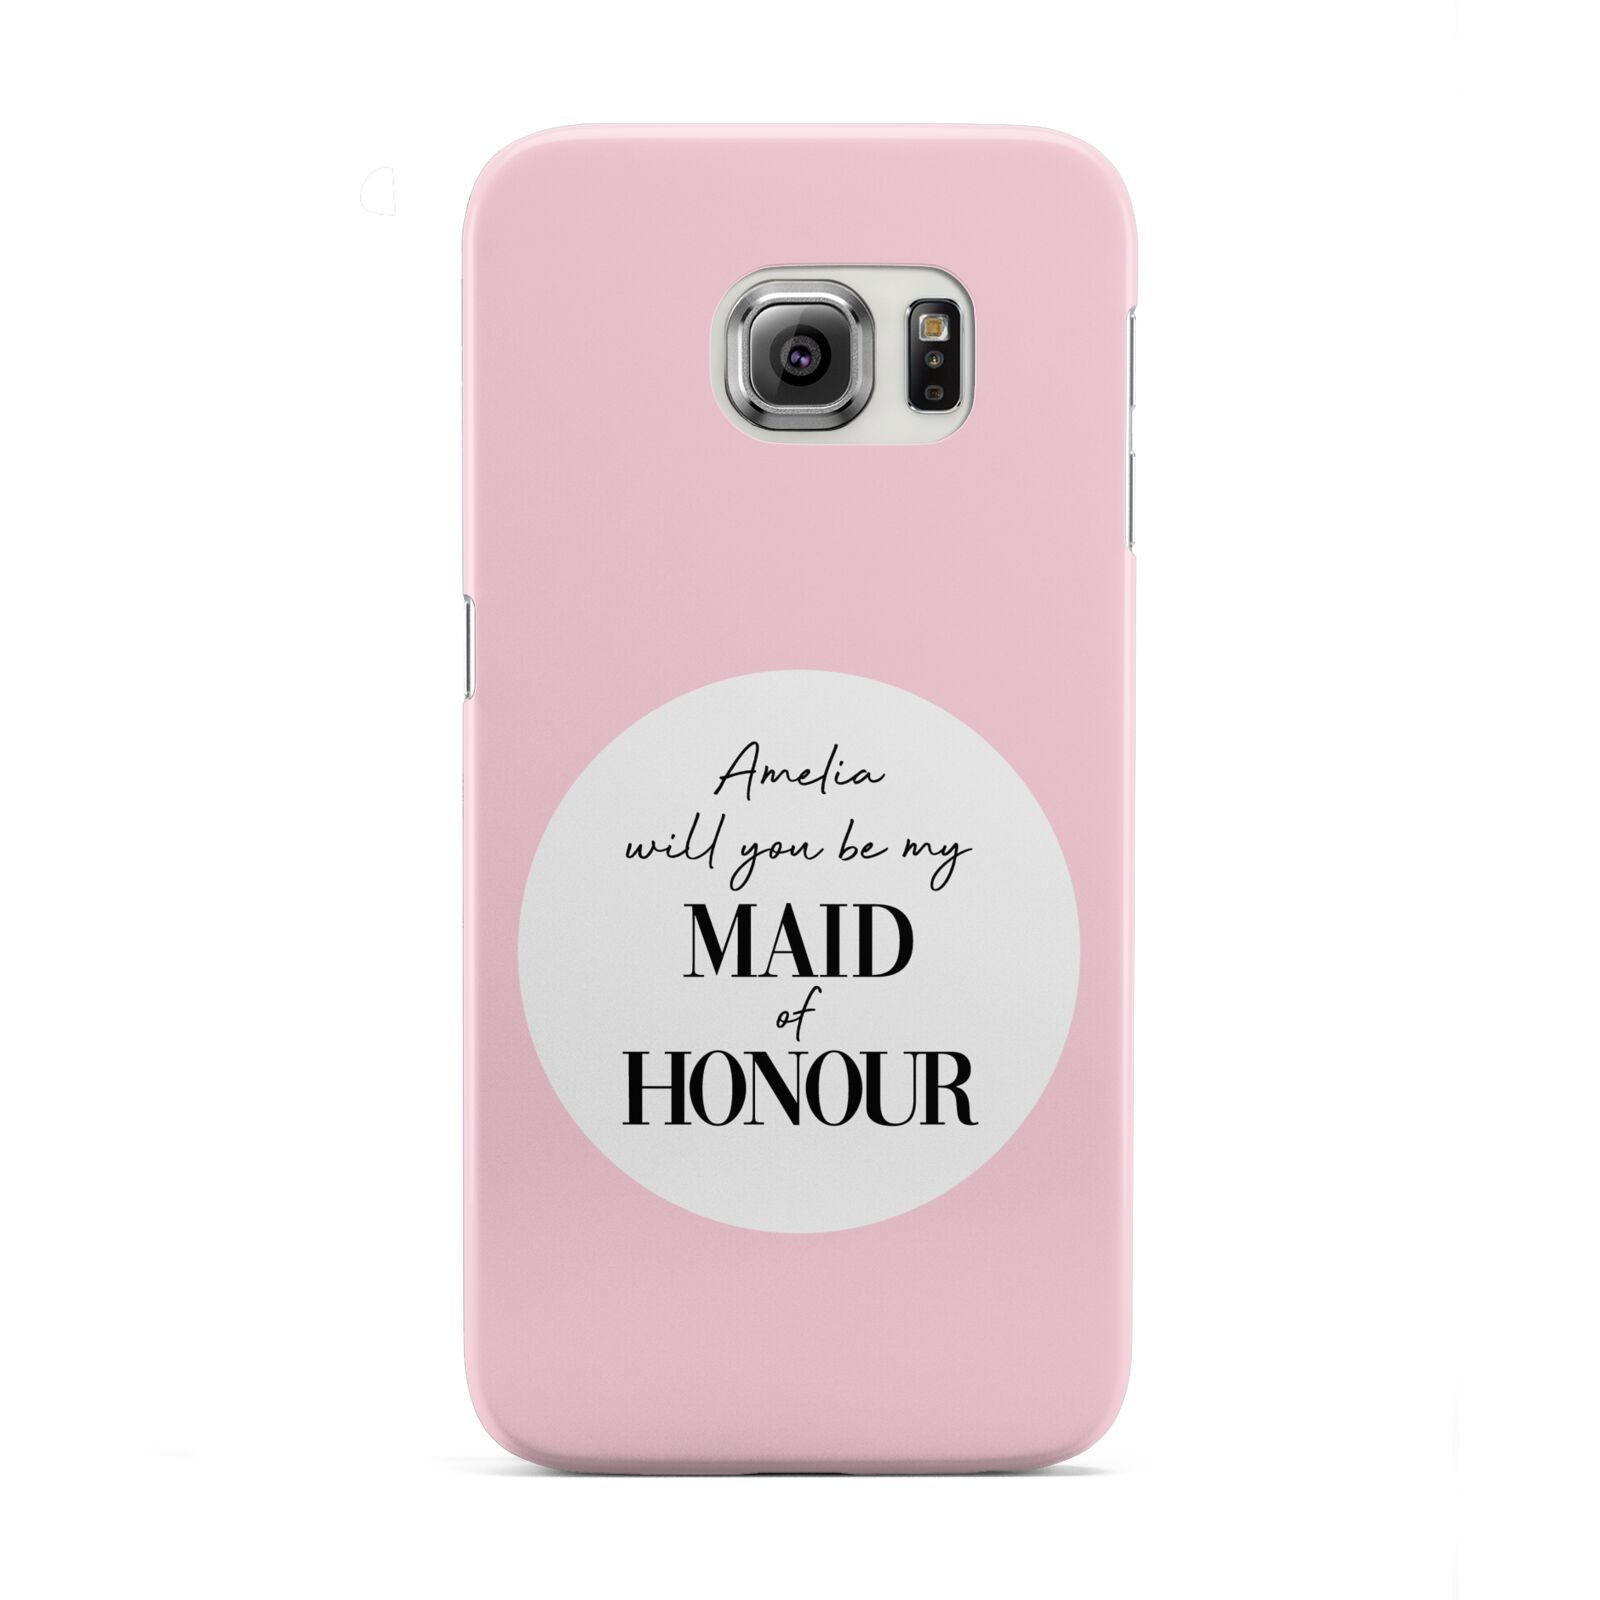 Will You Be My Maid Of Honour Samsung Galaxy S6 Edge Case